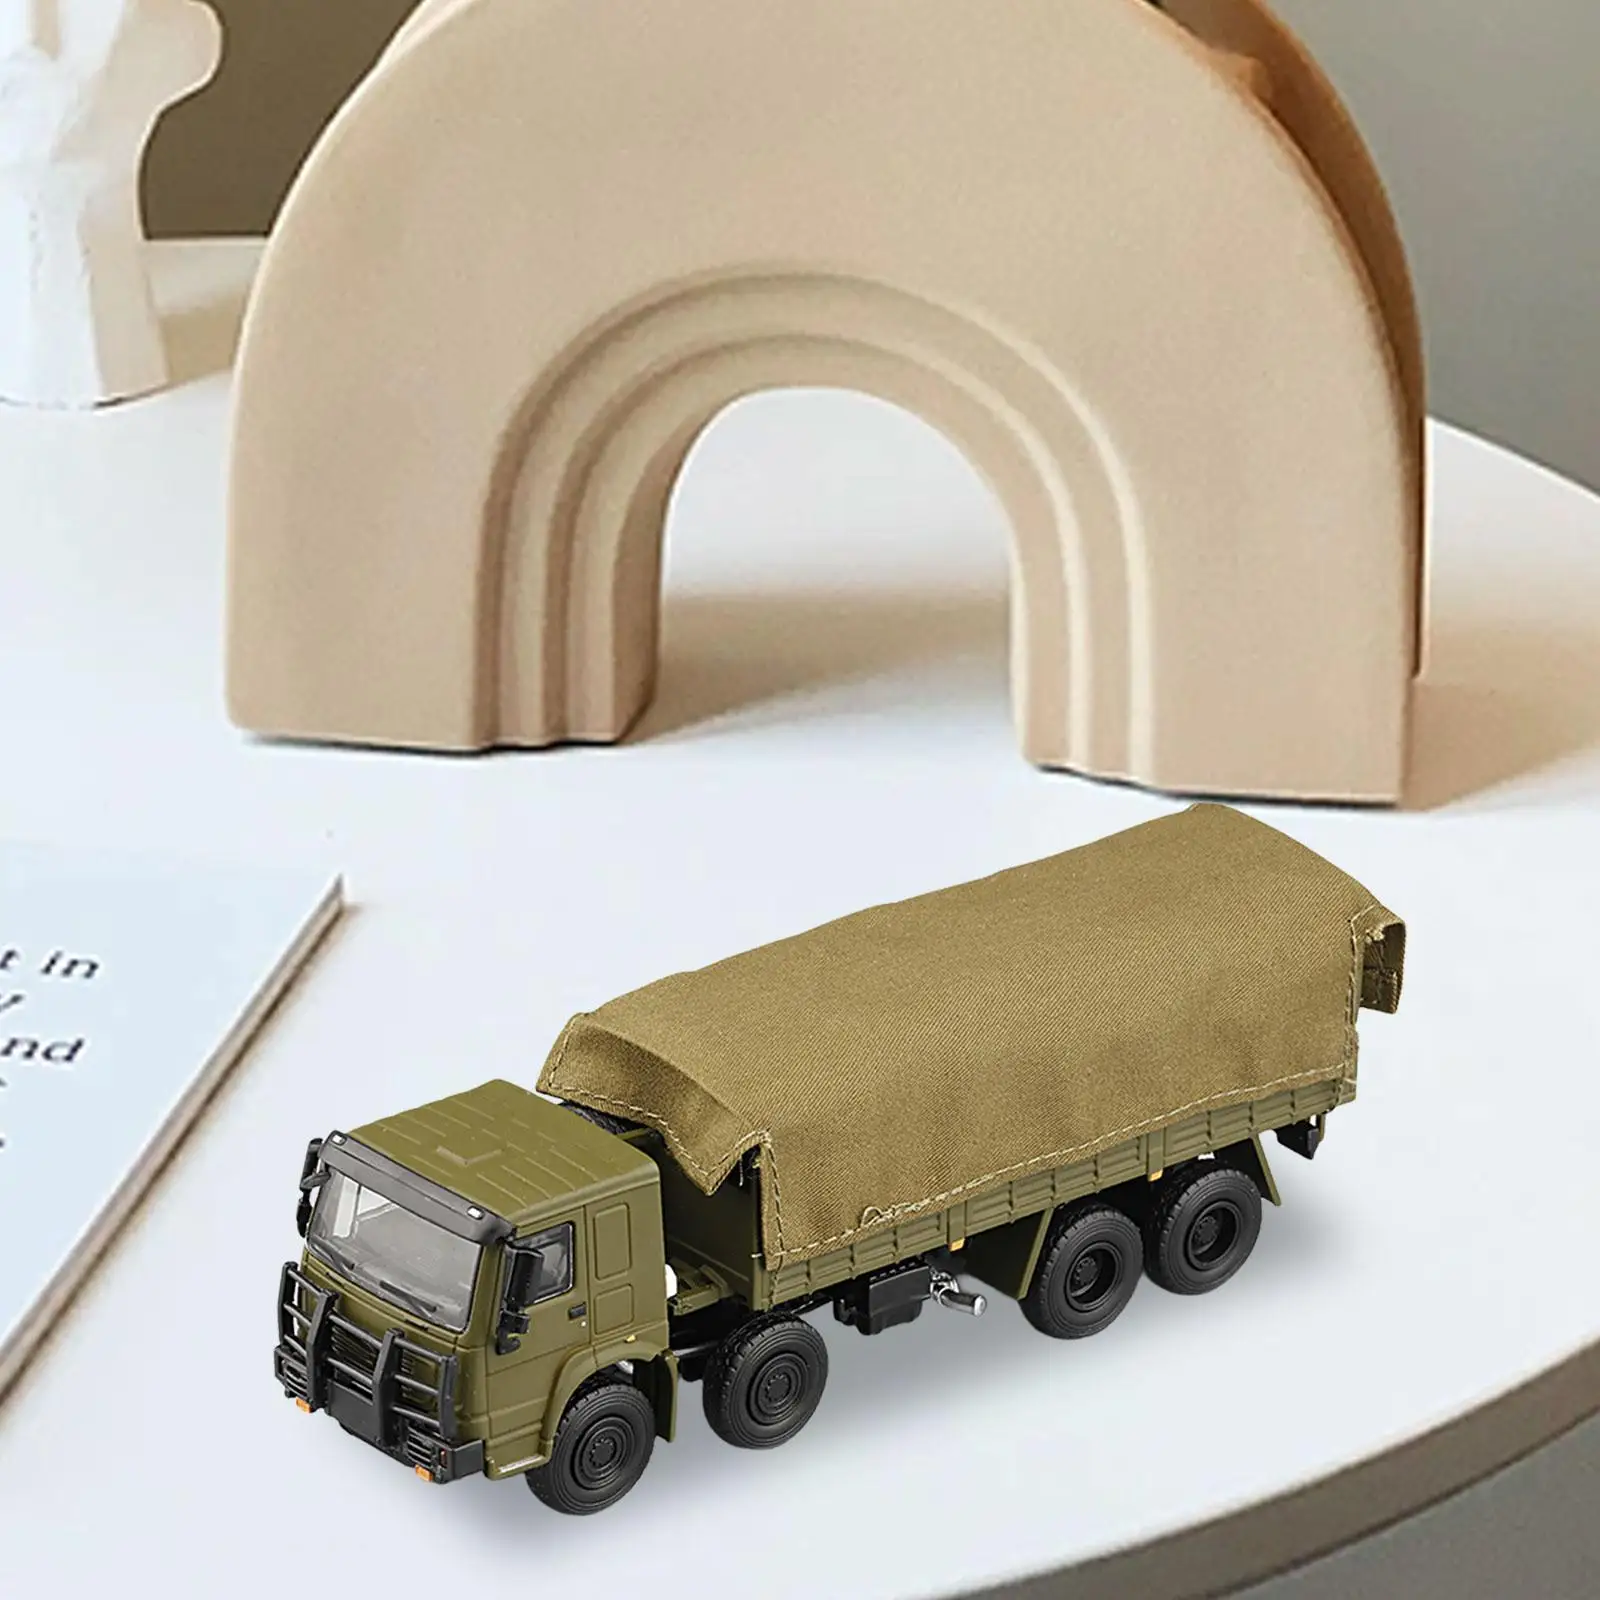 Simulation 1/64 Car Model Model Diorama Scenes Children Gifts Mini Vehicles Toys for Micro Landscapes Photography Props Decor